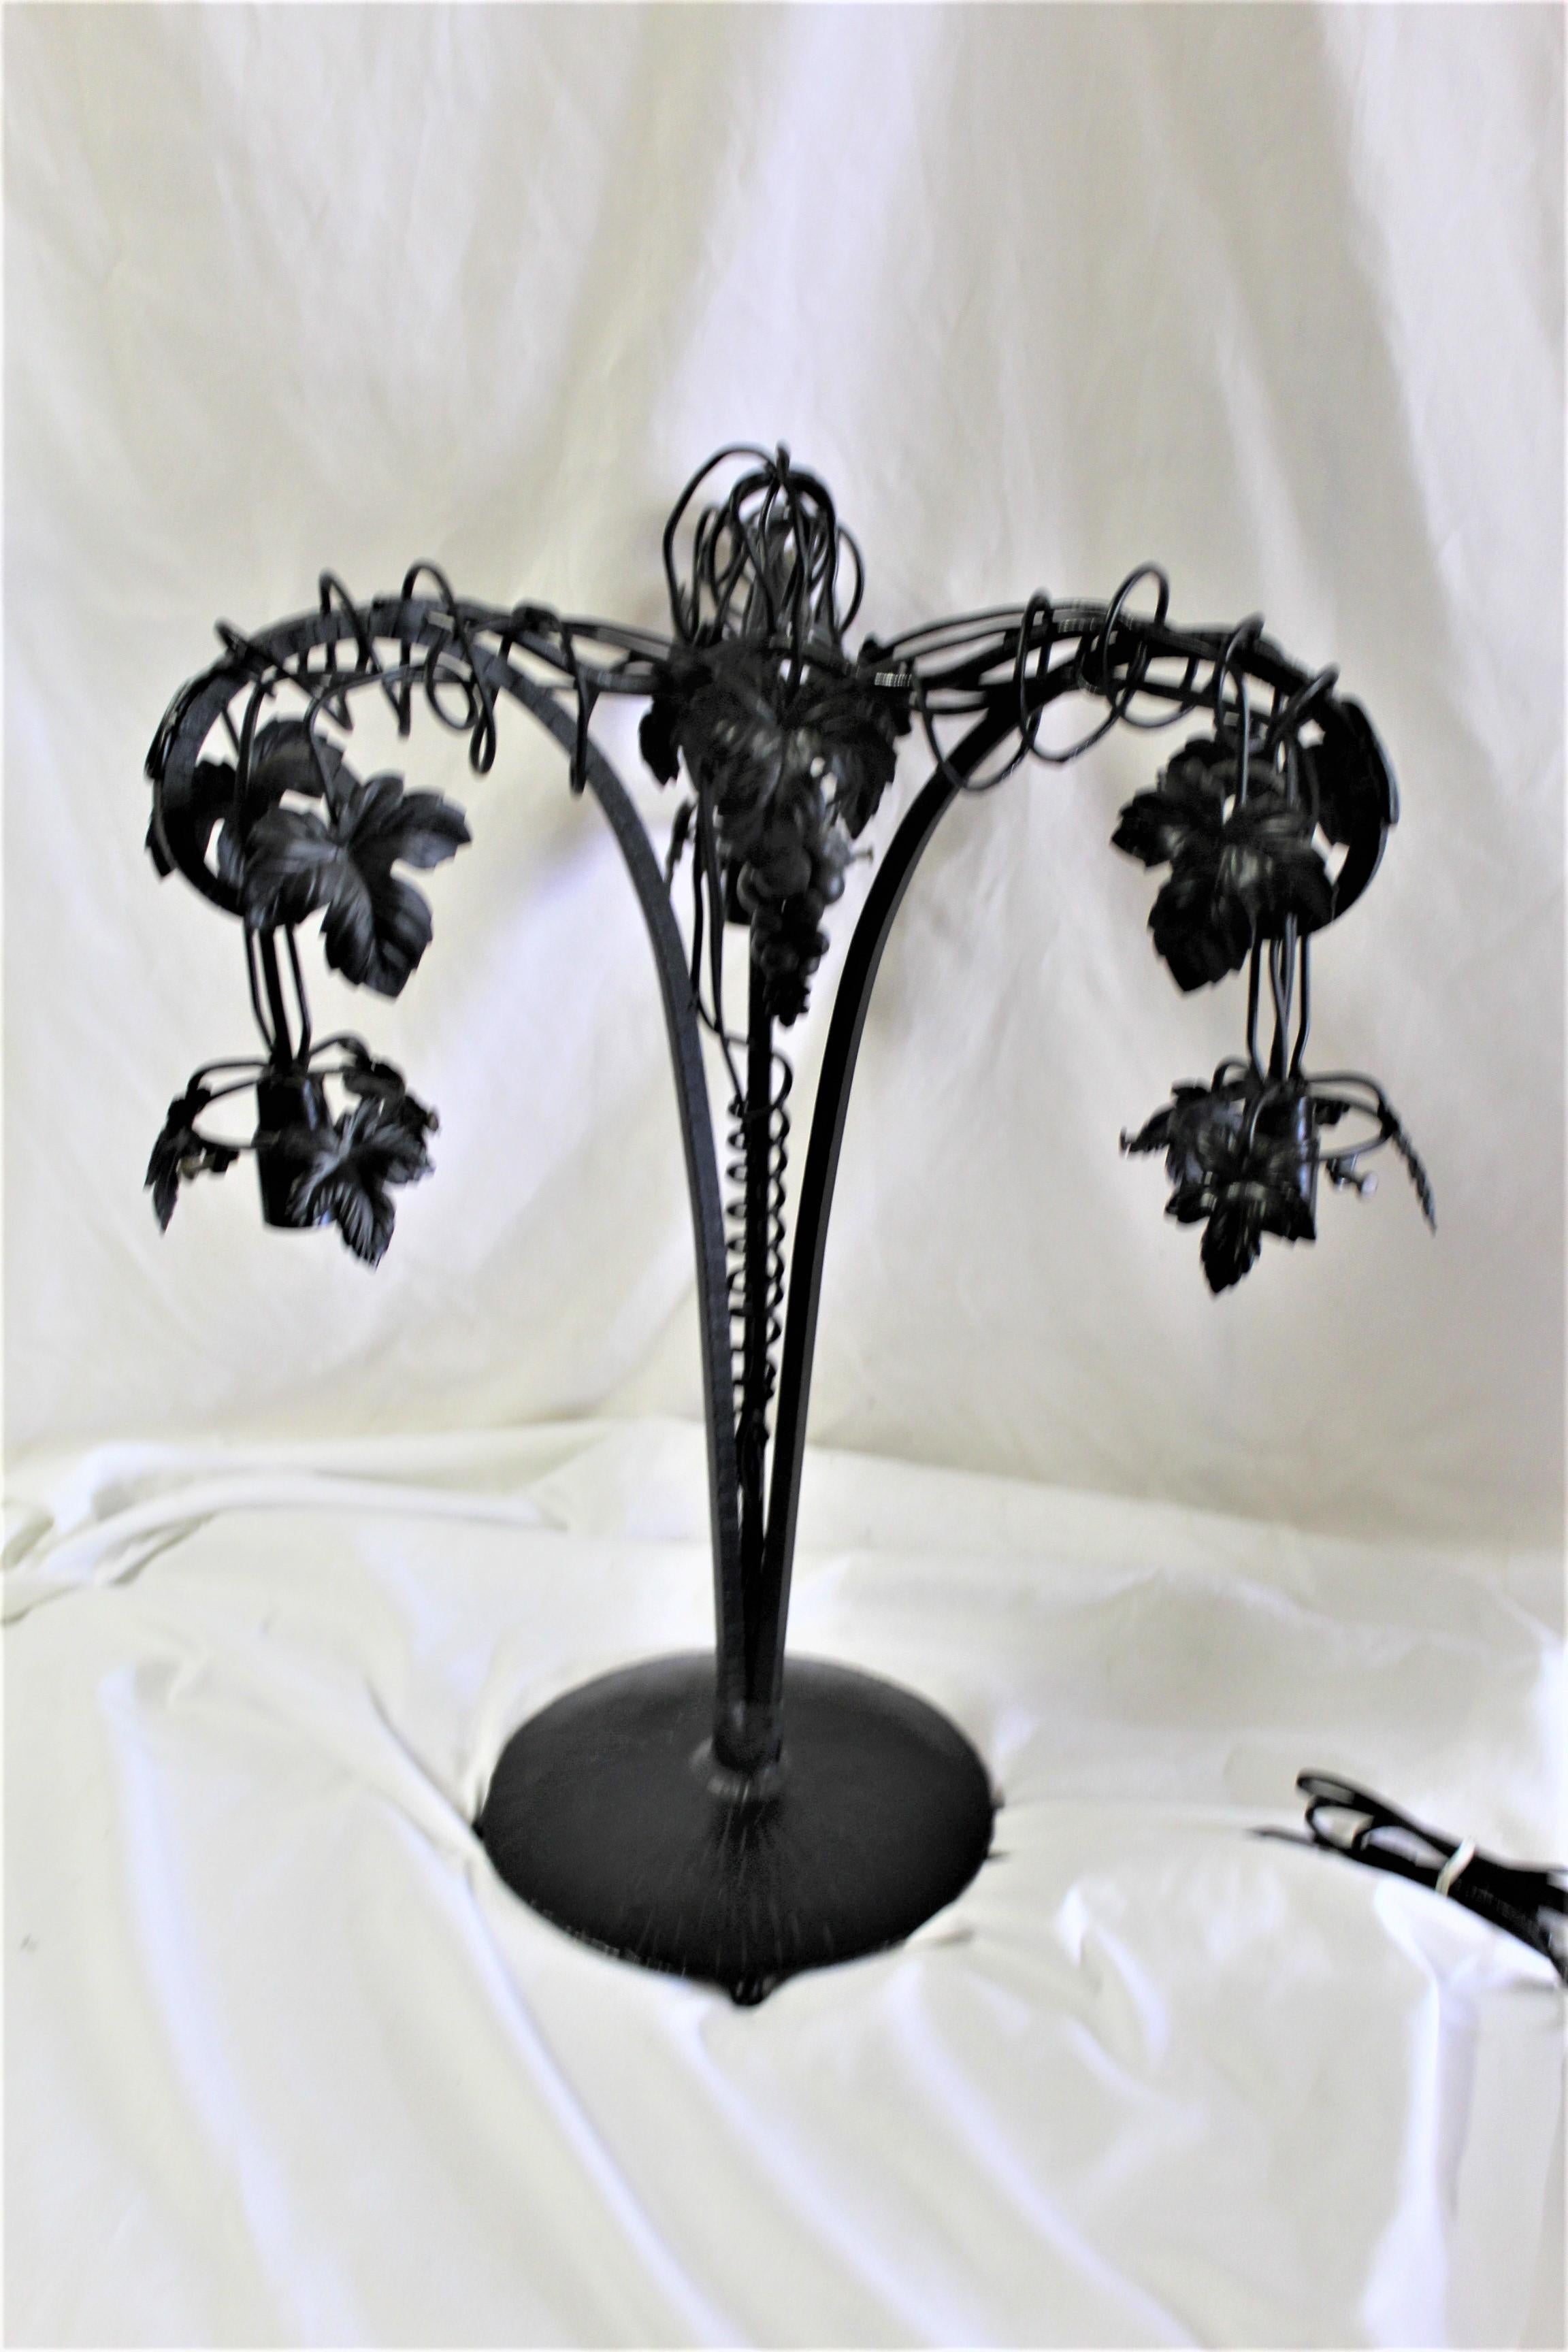 All hand forged iron metal base in the grape vine design from the E.Brandt design. With 3 French art glass shades from Vianne. Base is finished in semi-black painted finish. Total ht is at 22